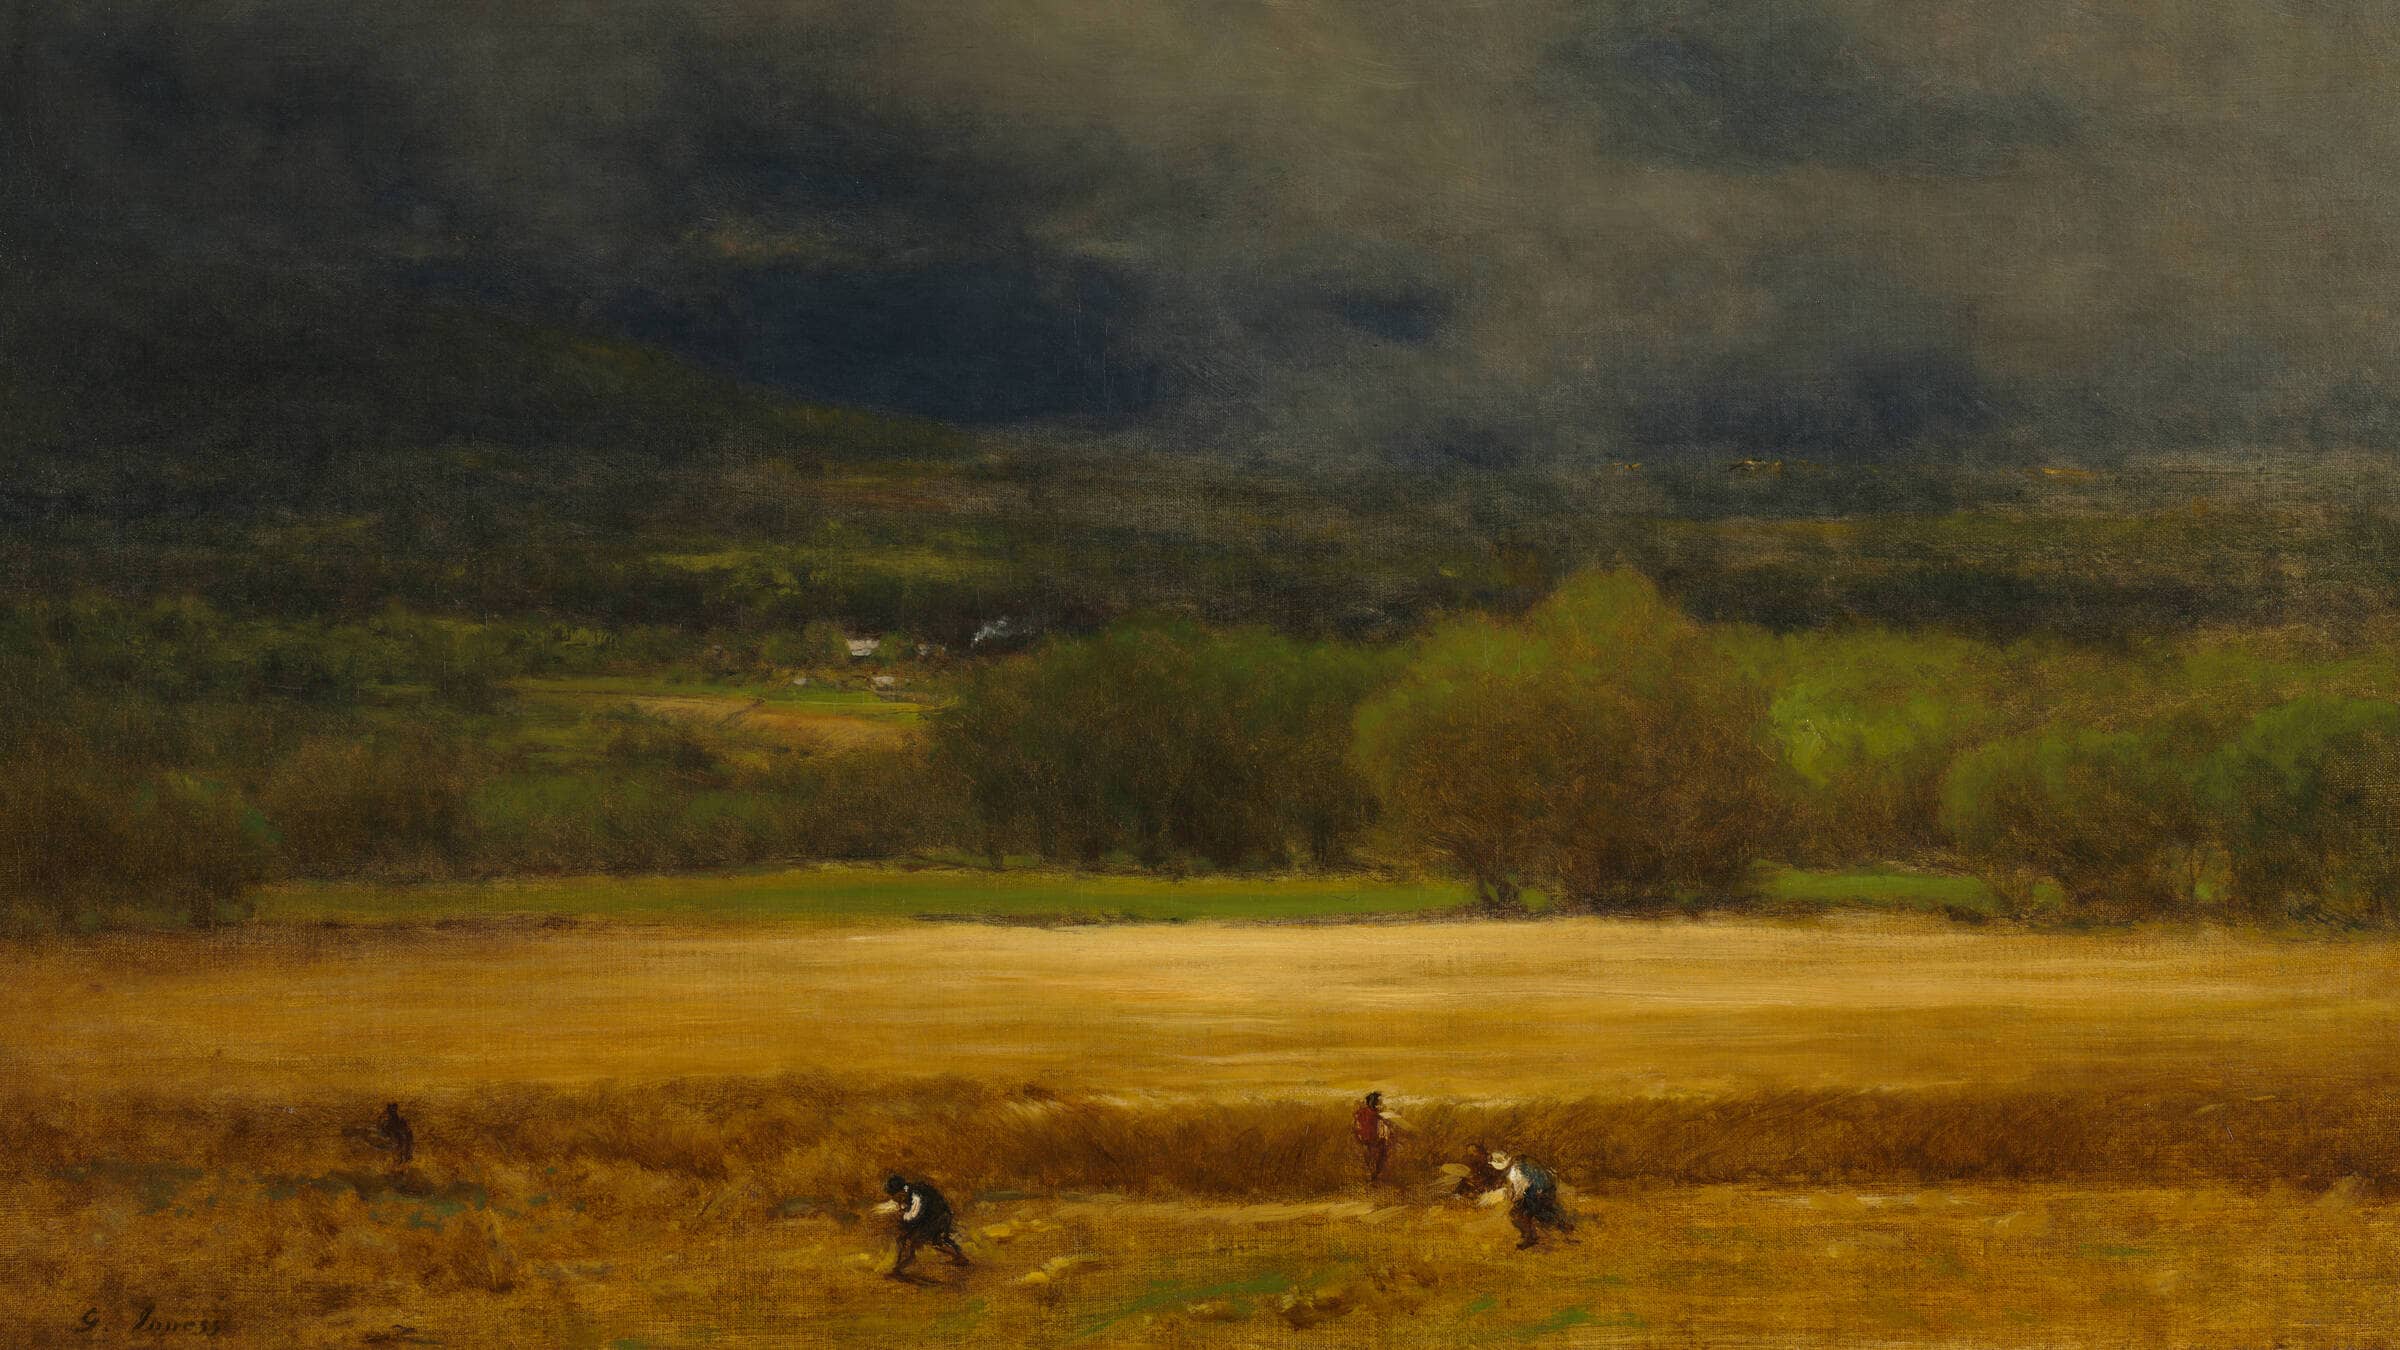 The Wheat Field painting by George Inness, c. 1875–1877